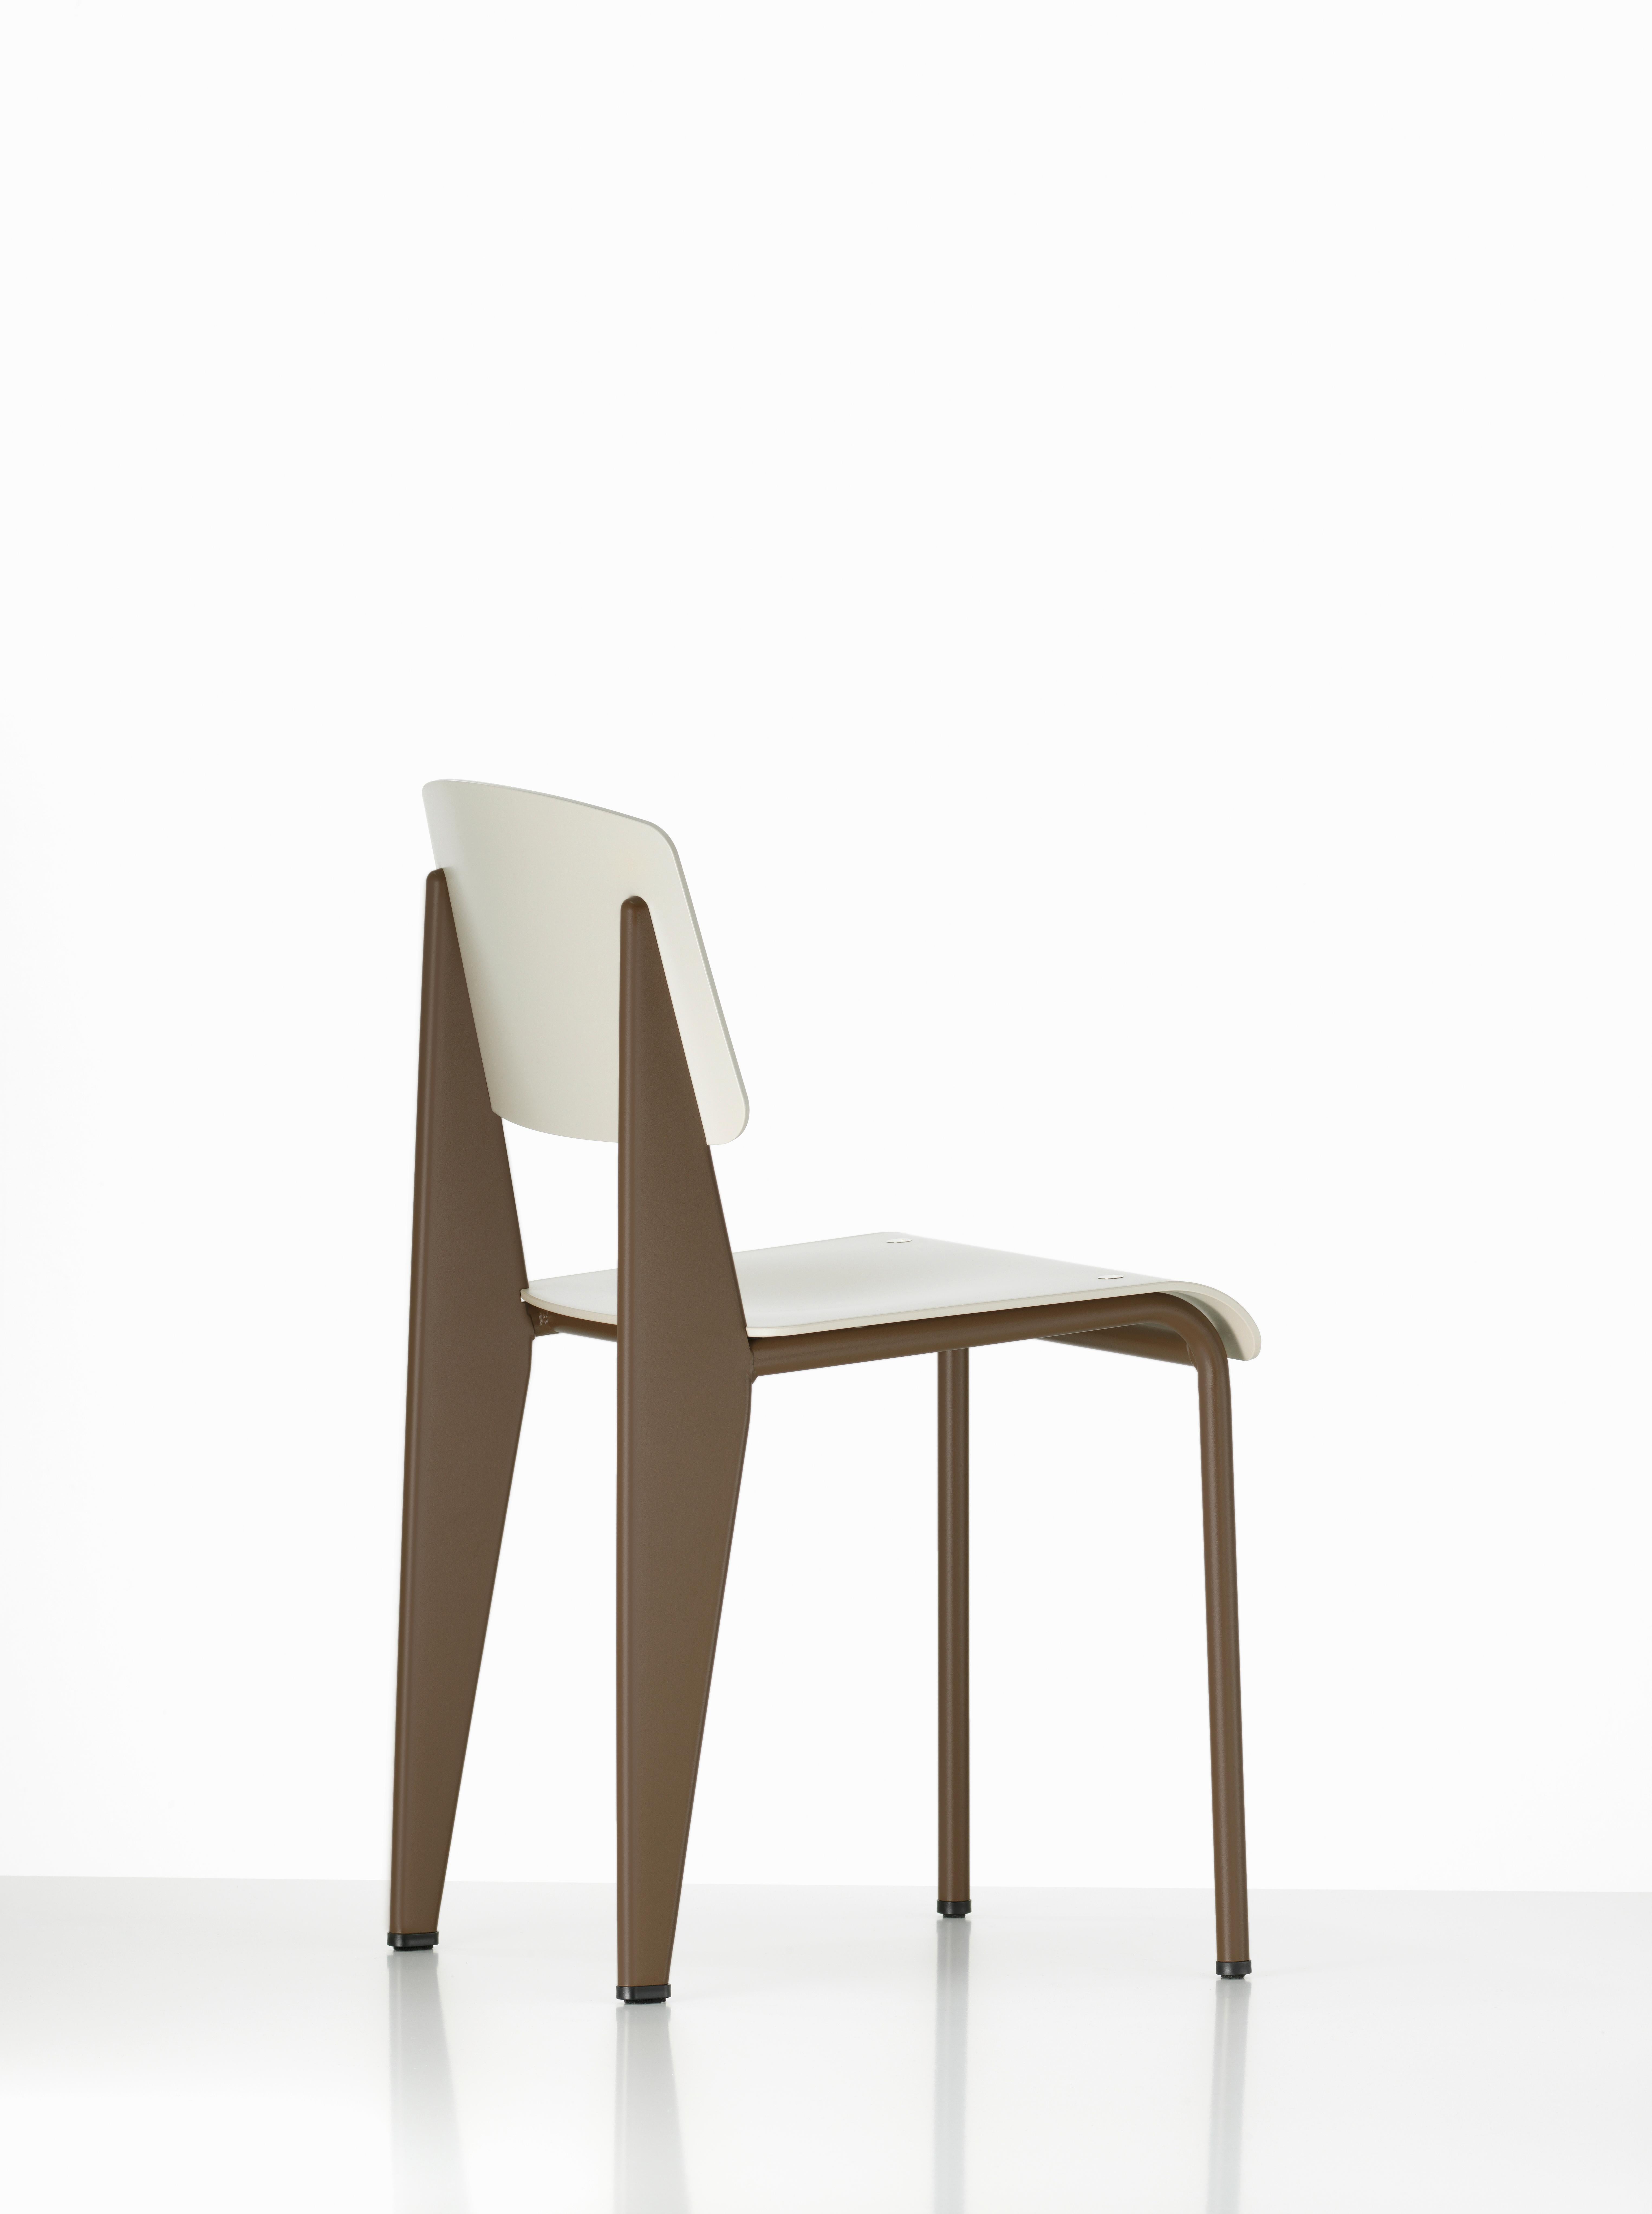 Jean Prouvé Standard Chair SP in Teak Brown and Mint for Vitra 1